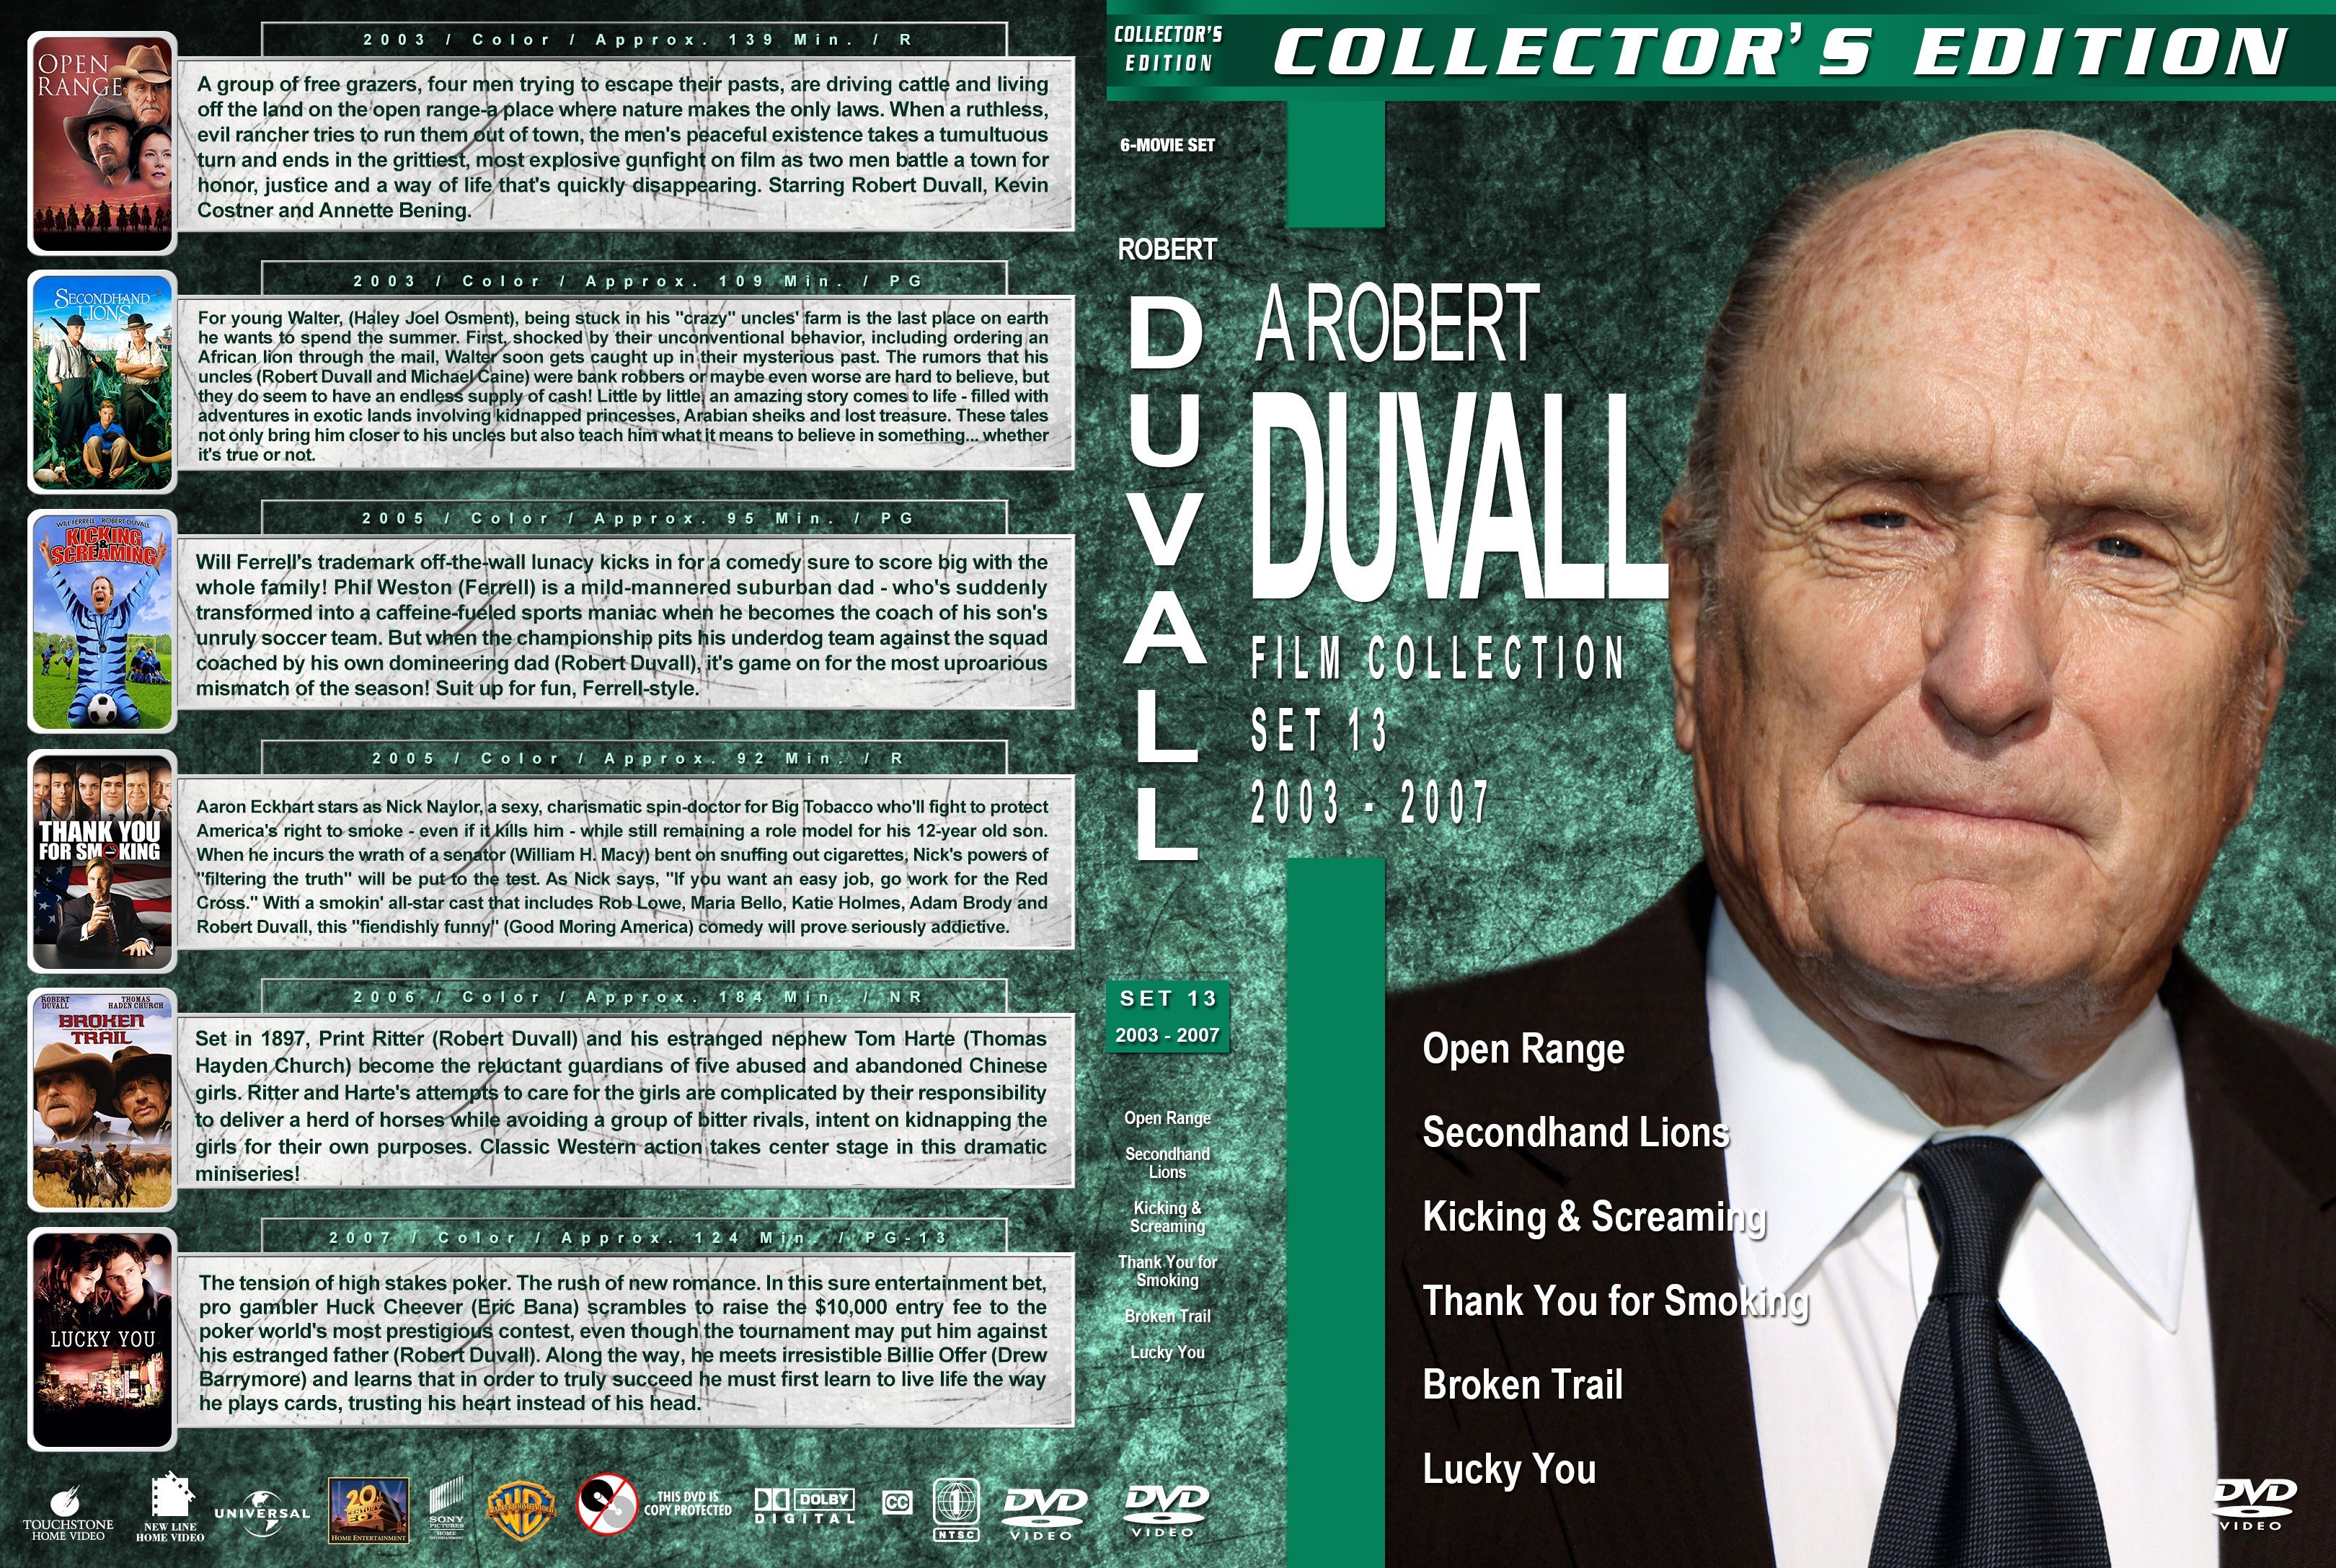 Robert Duvall Film Collection Set 13 2003 2007 R1 Covers.